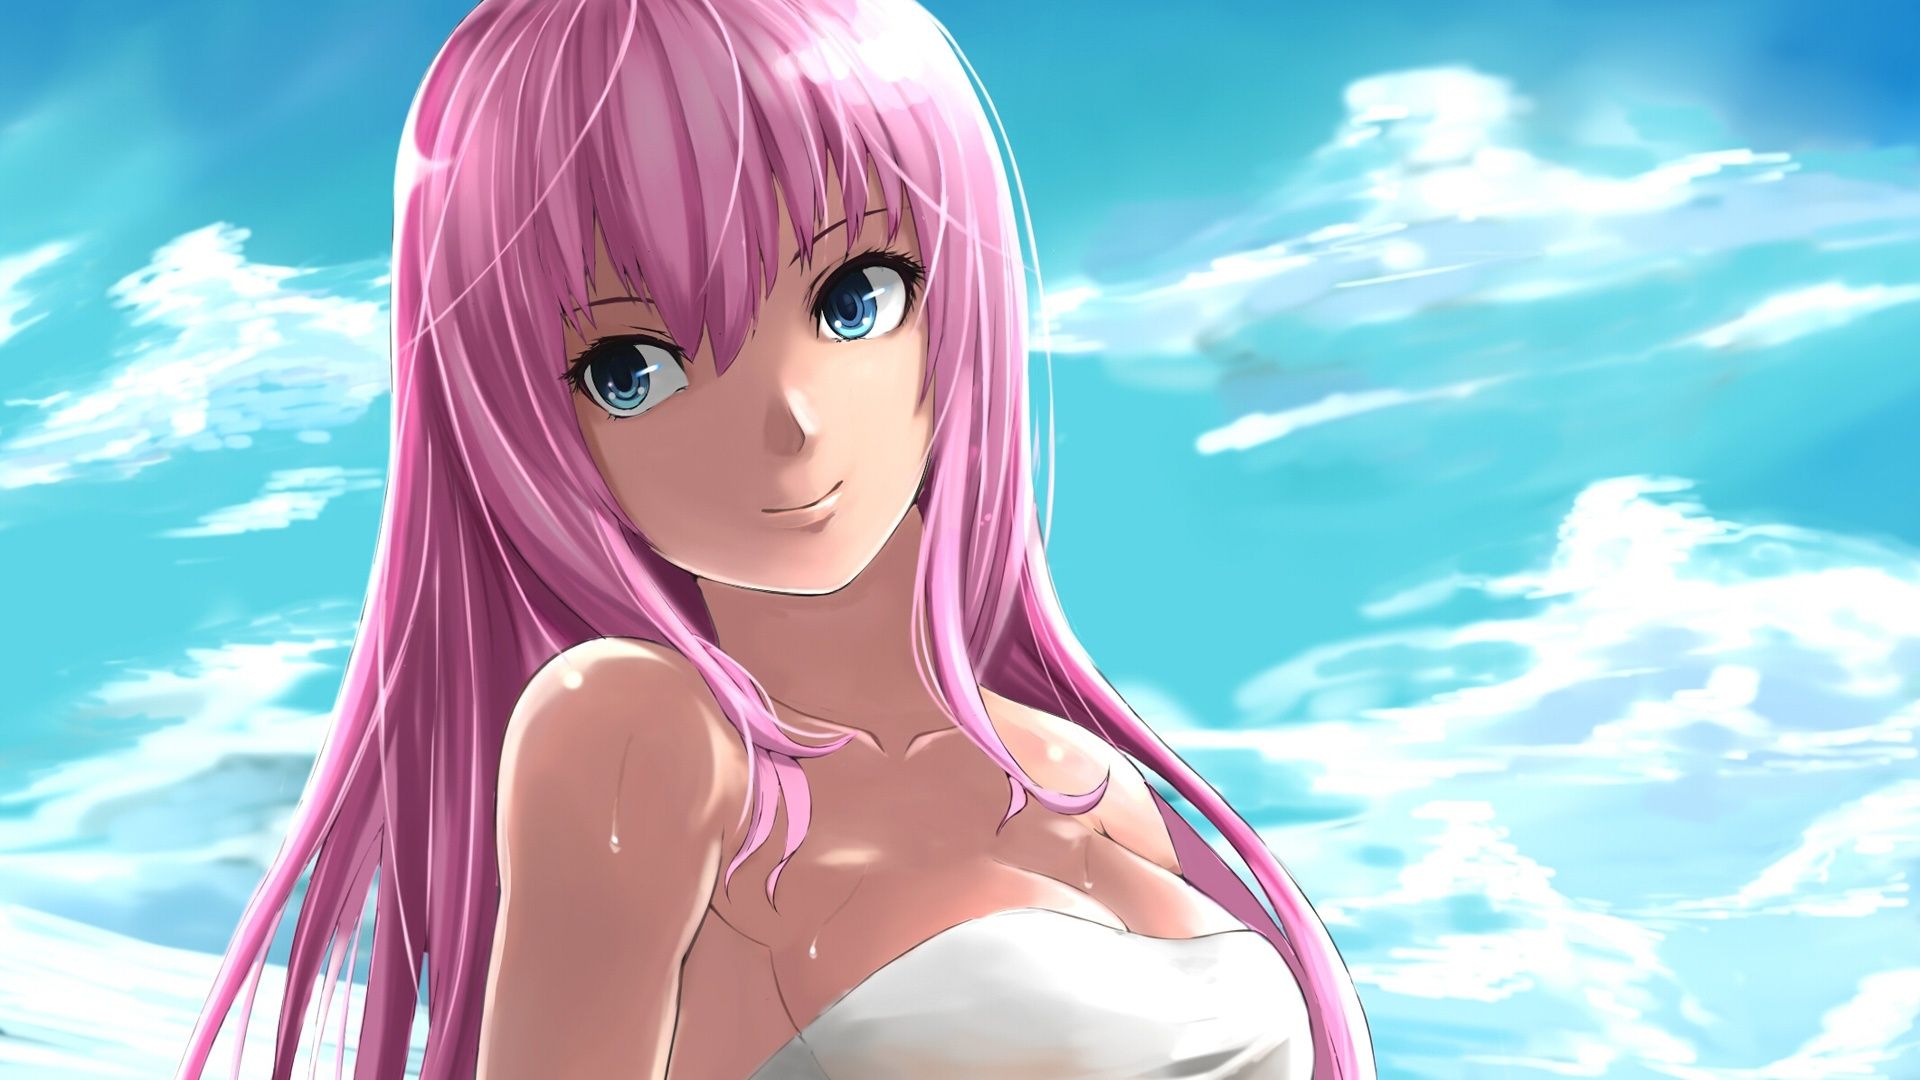 Wallpaper Anime girl smiling, pink hair, the blue sky and white